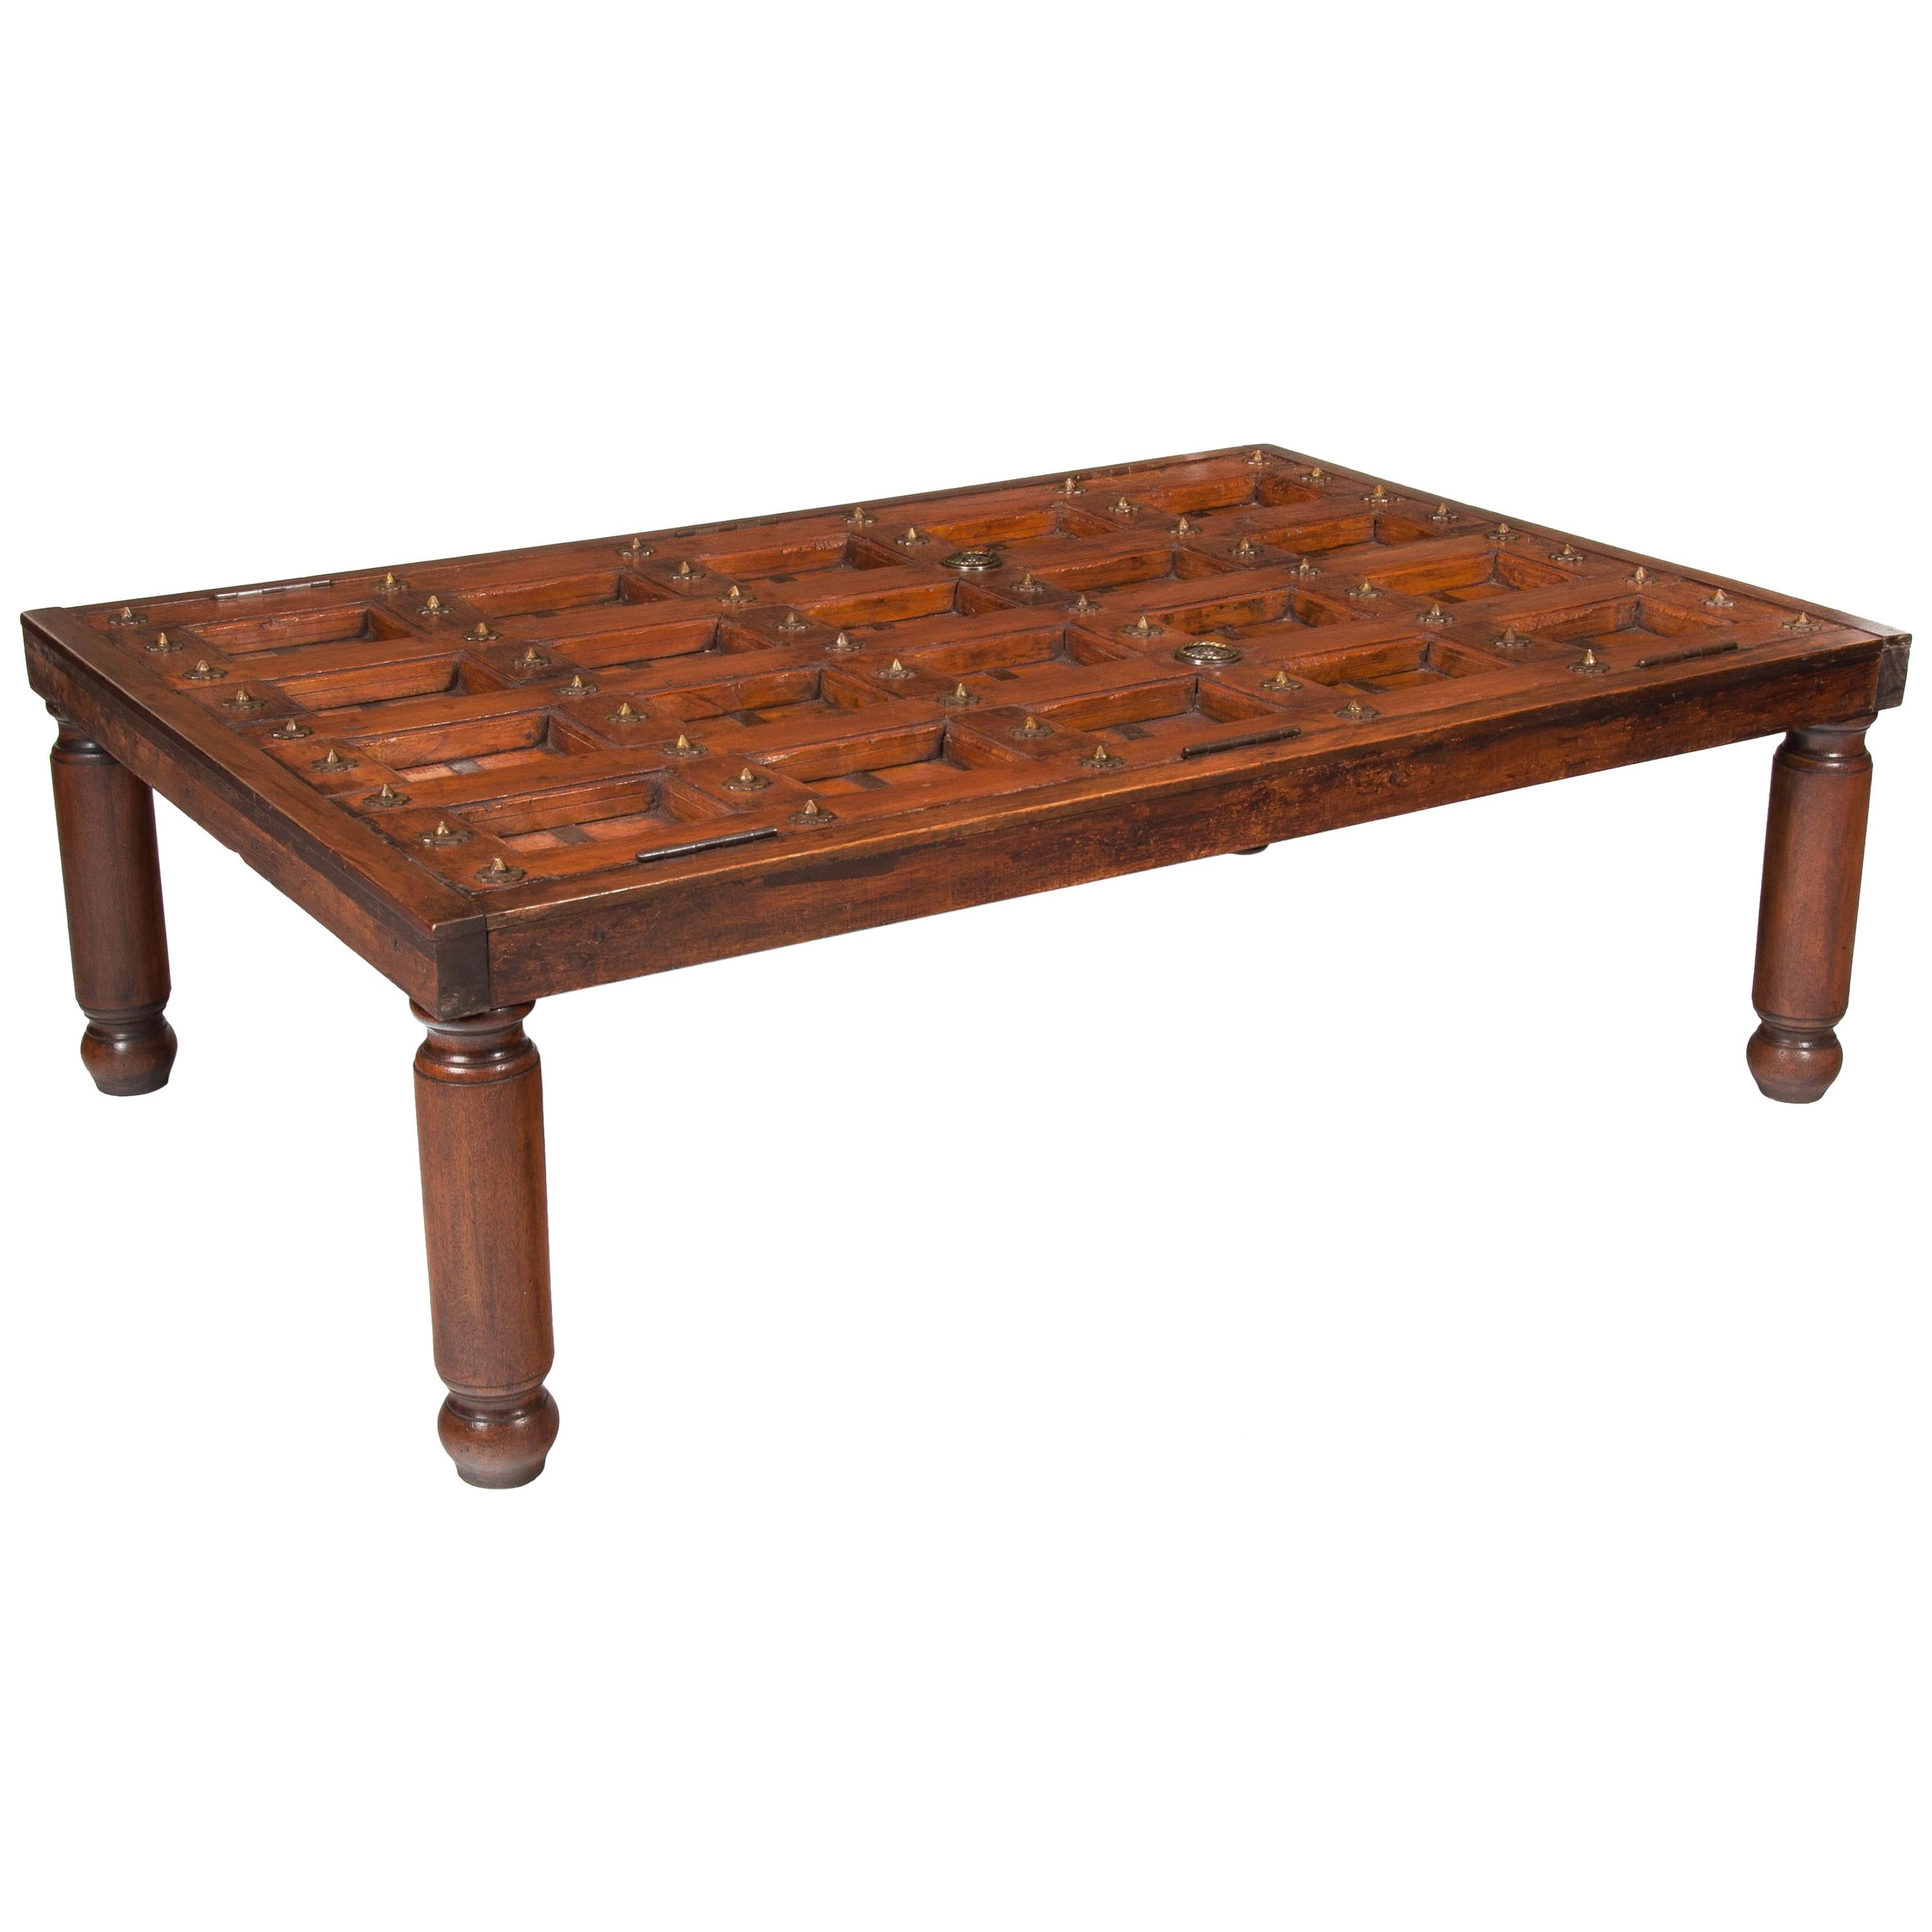 Early 19th Century Indian Door Coffee Table